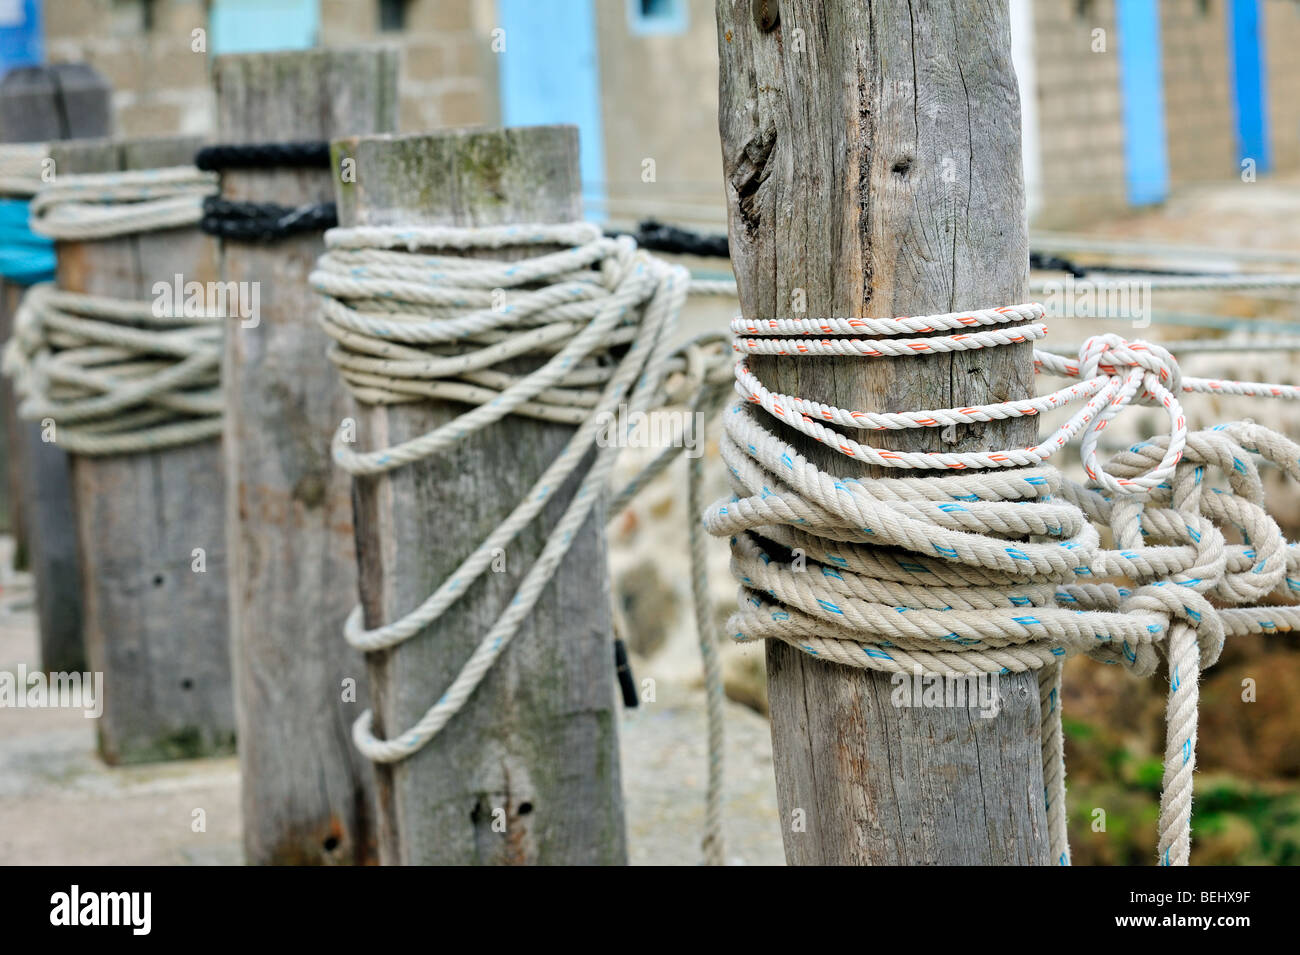 Ropes knotted around wooden mooring posts at Port Racine, the smallest harbour in France at Saint-Germain-des-Vaux, Normandy Stock Photo